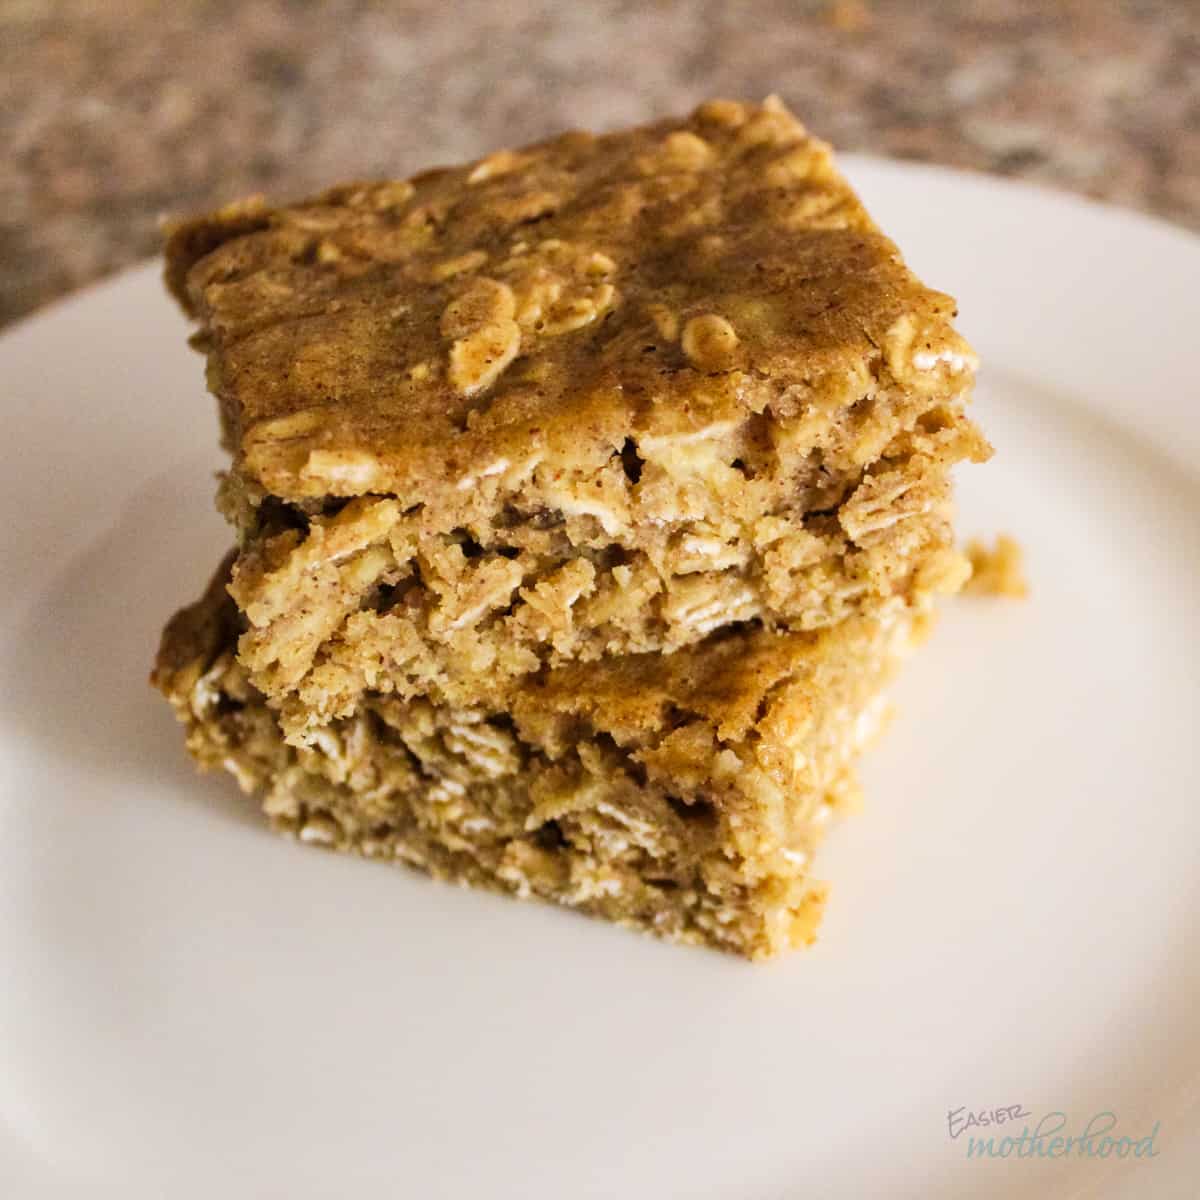 Two soft baked peanut butter oat bars stacked on a white plate